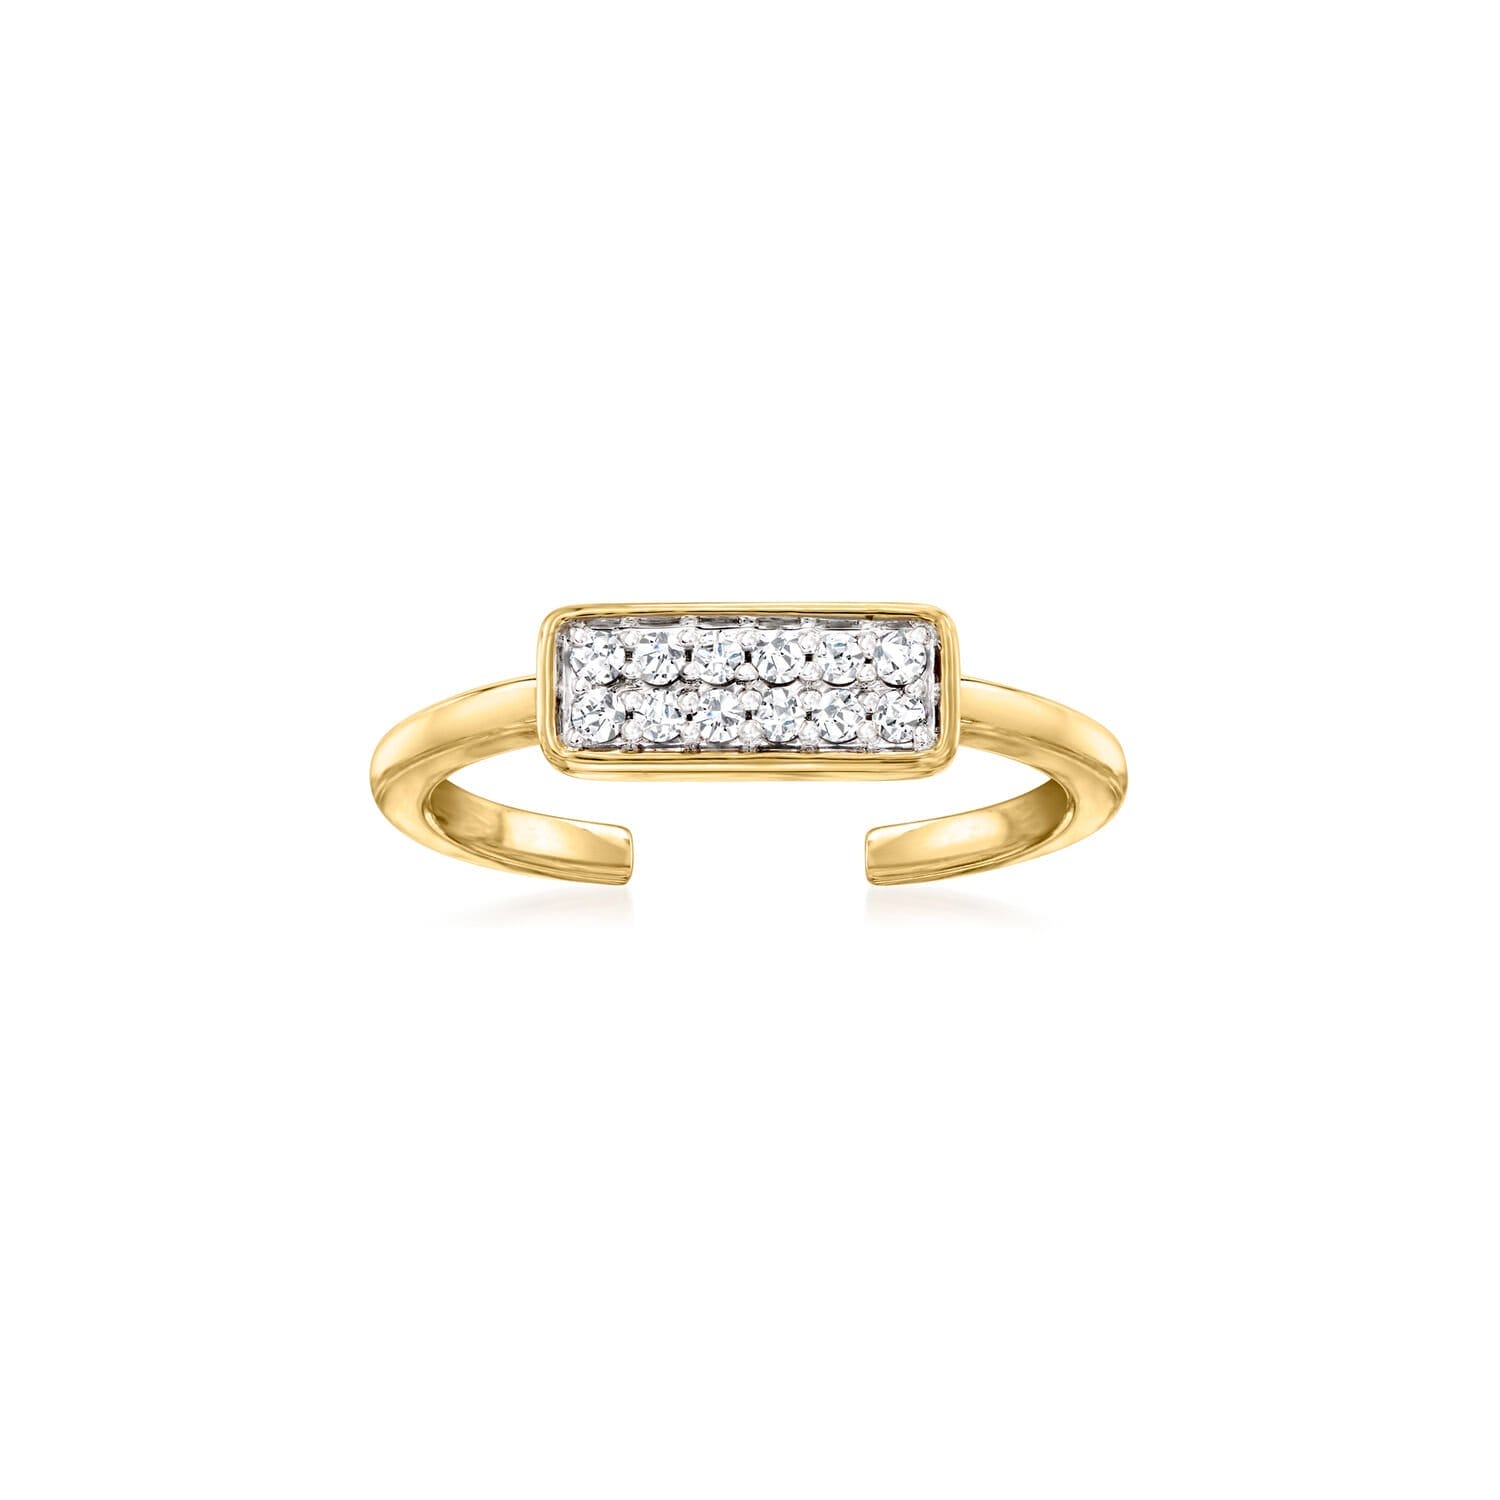 .10 ct. t.w. Diamond Cluster Toe Ring in 14kt Yellow Gold